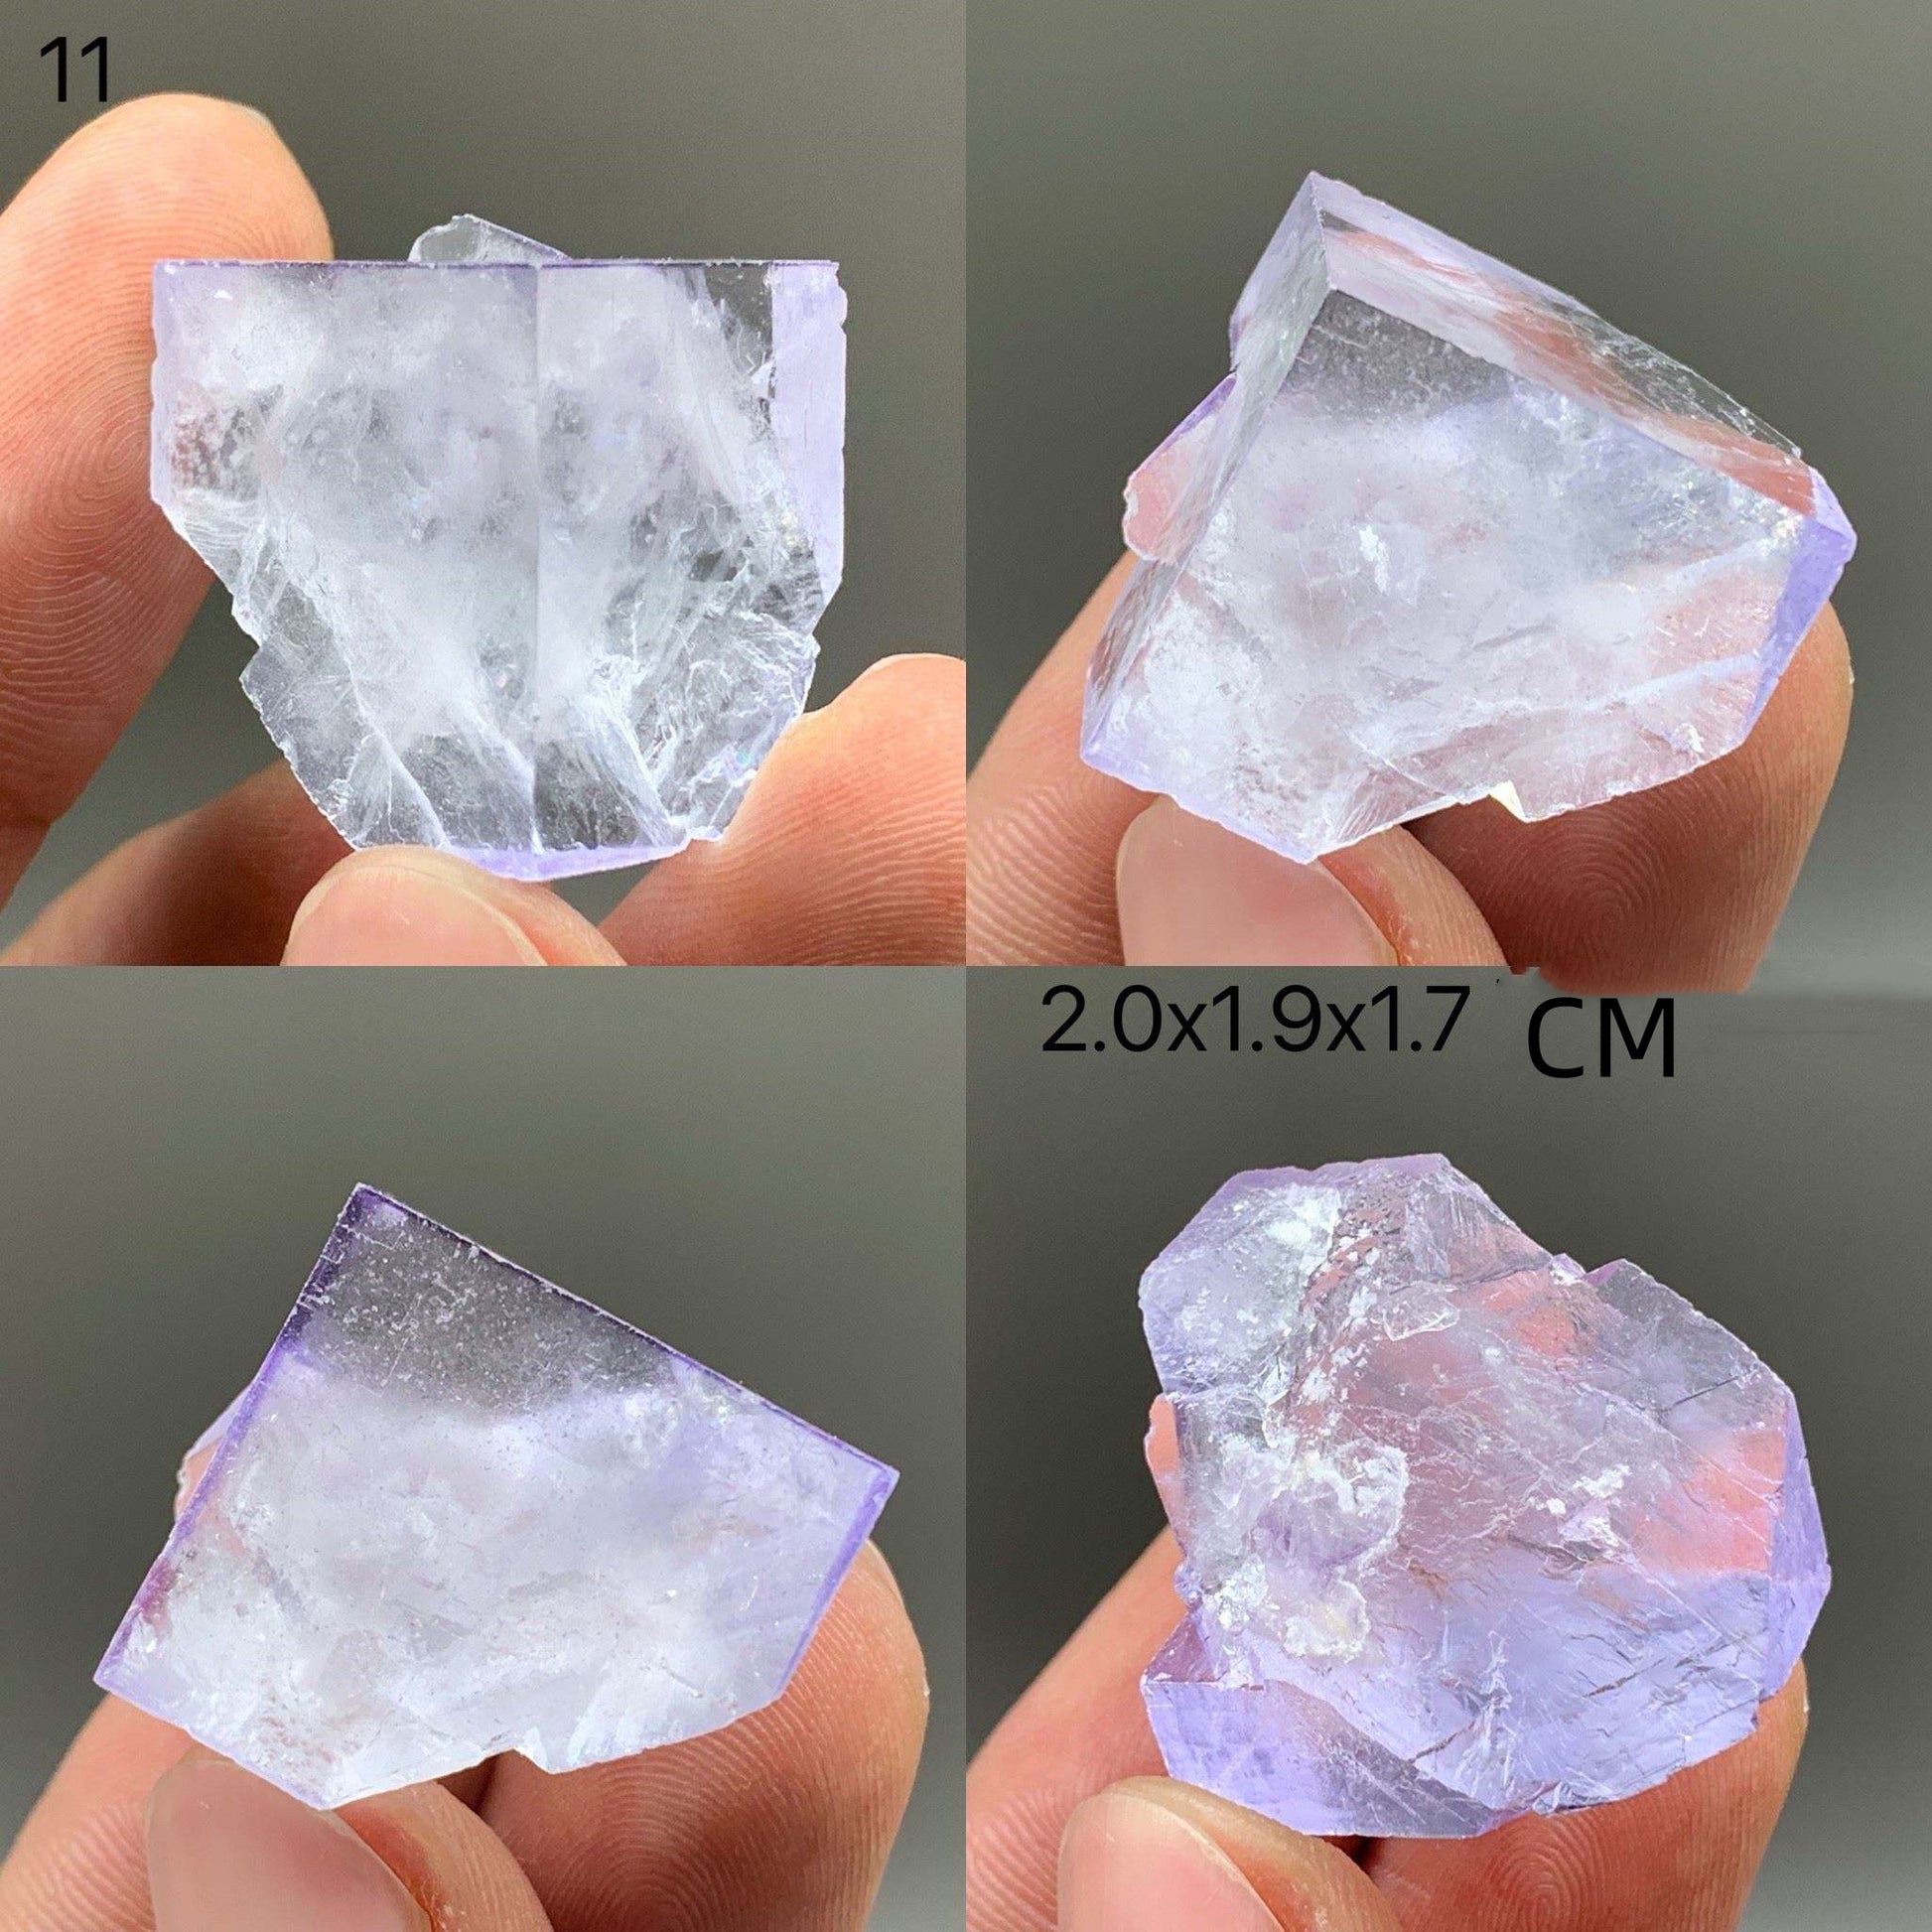 Maramalive™ Natural Amethyst Crystal Cluster Quartz Raw Crystals Healing in different shapes and sizes.